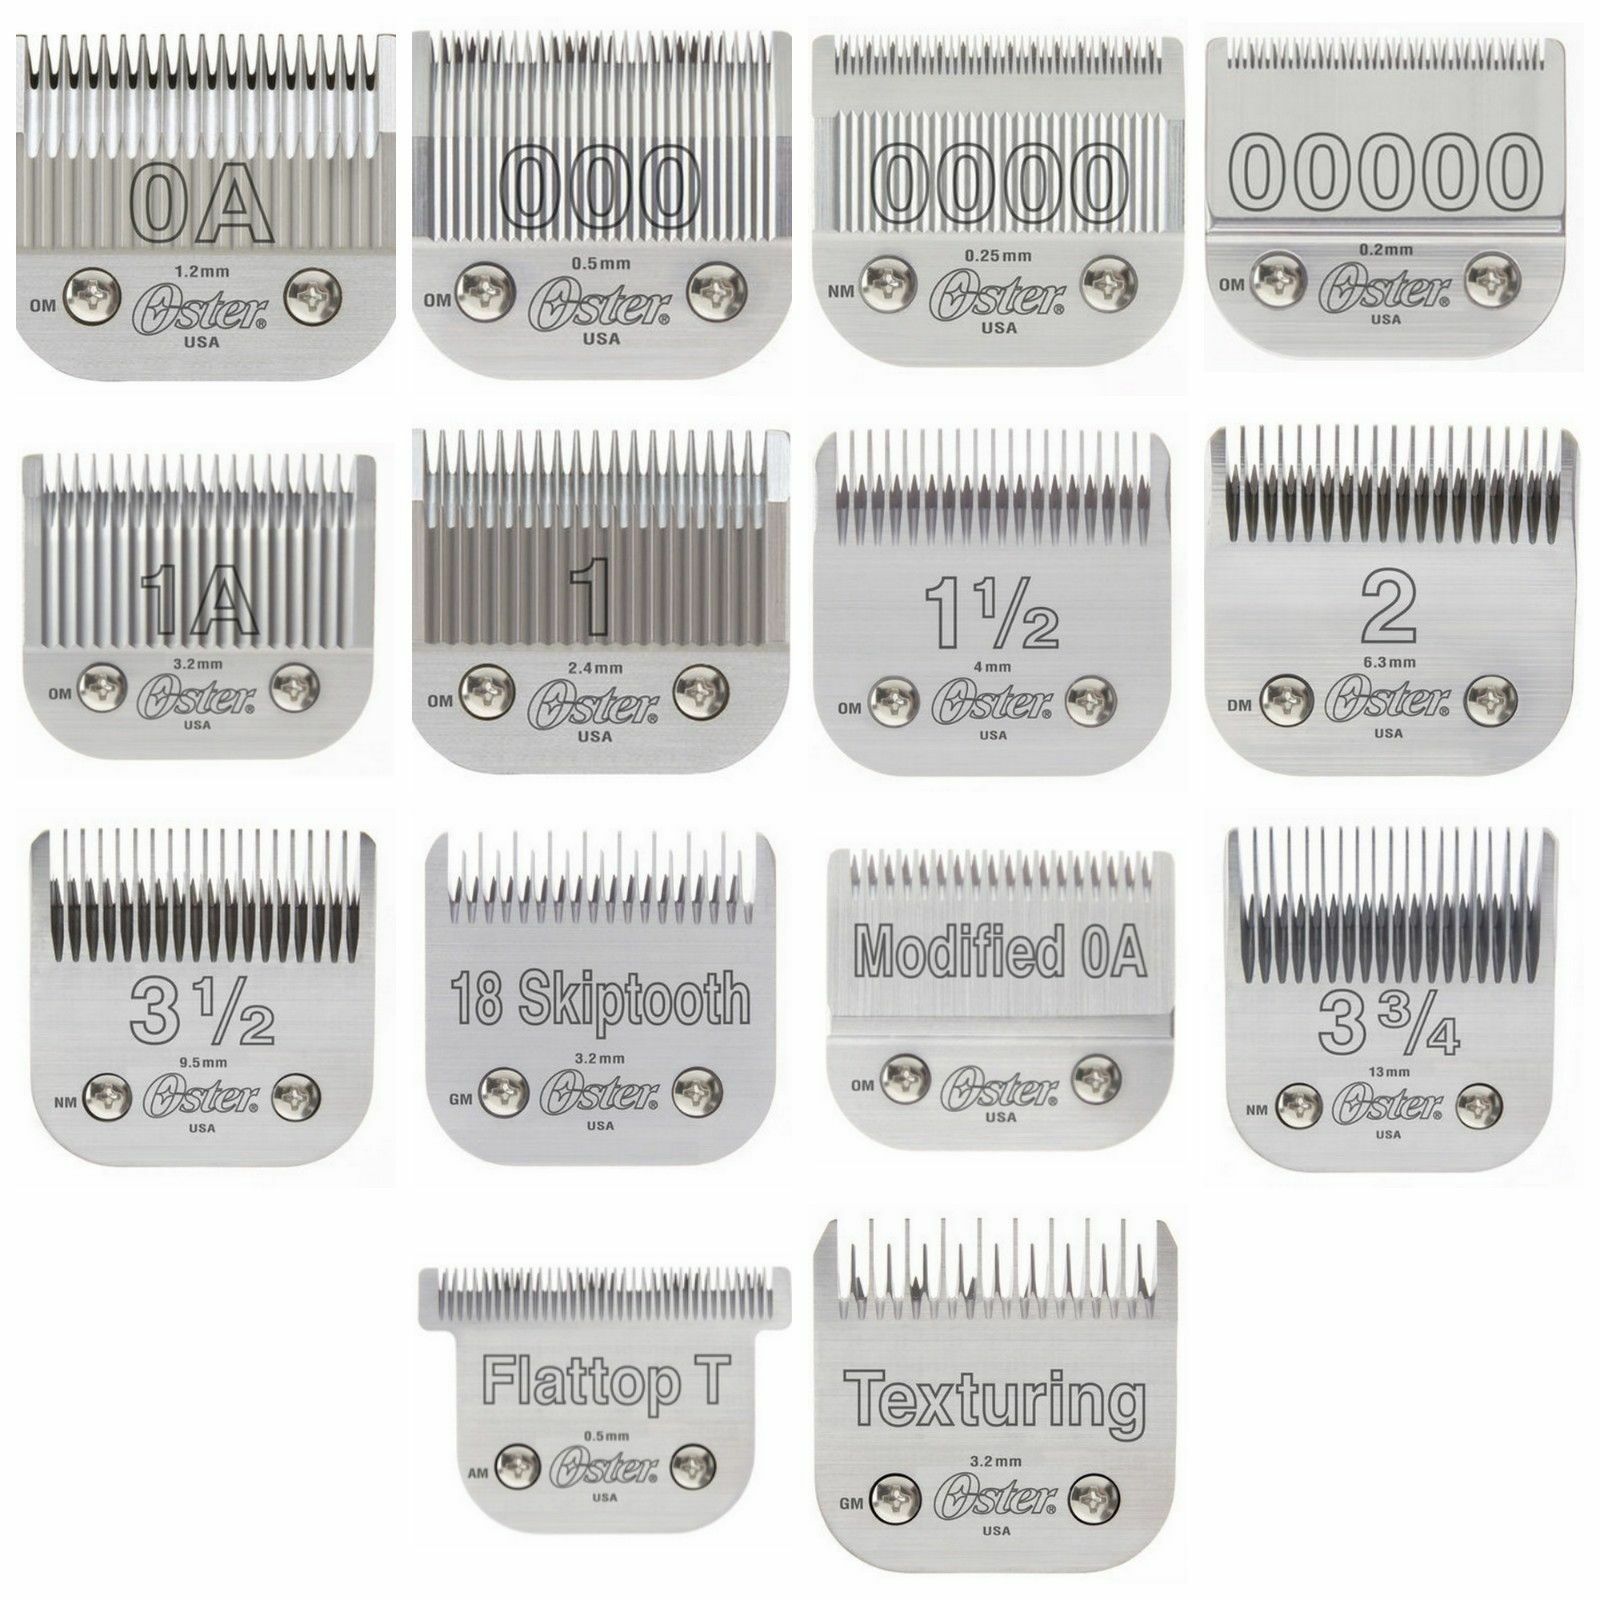 Oster Replacement Clipper Blades For Model 76, Titan, Powerline And New Model 10